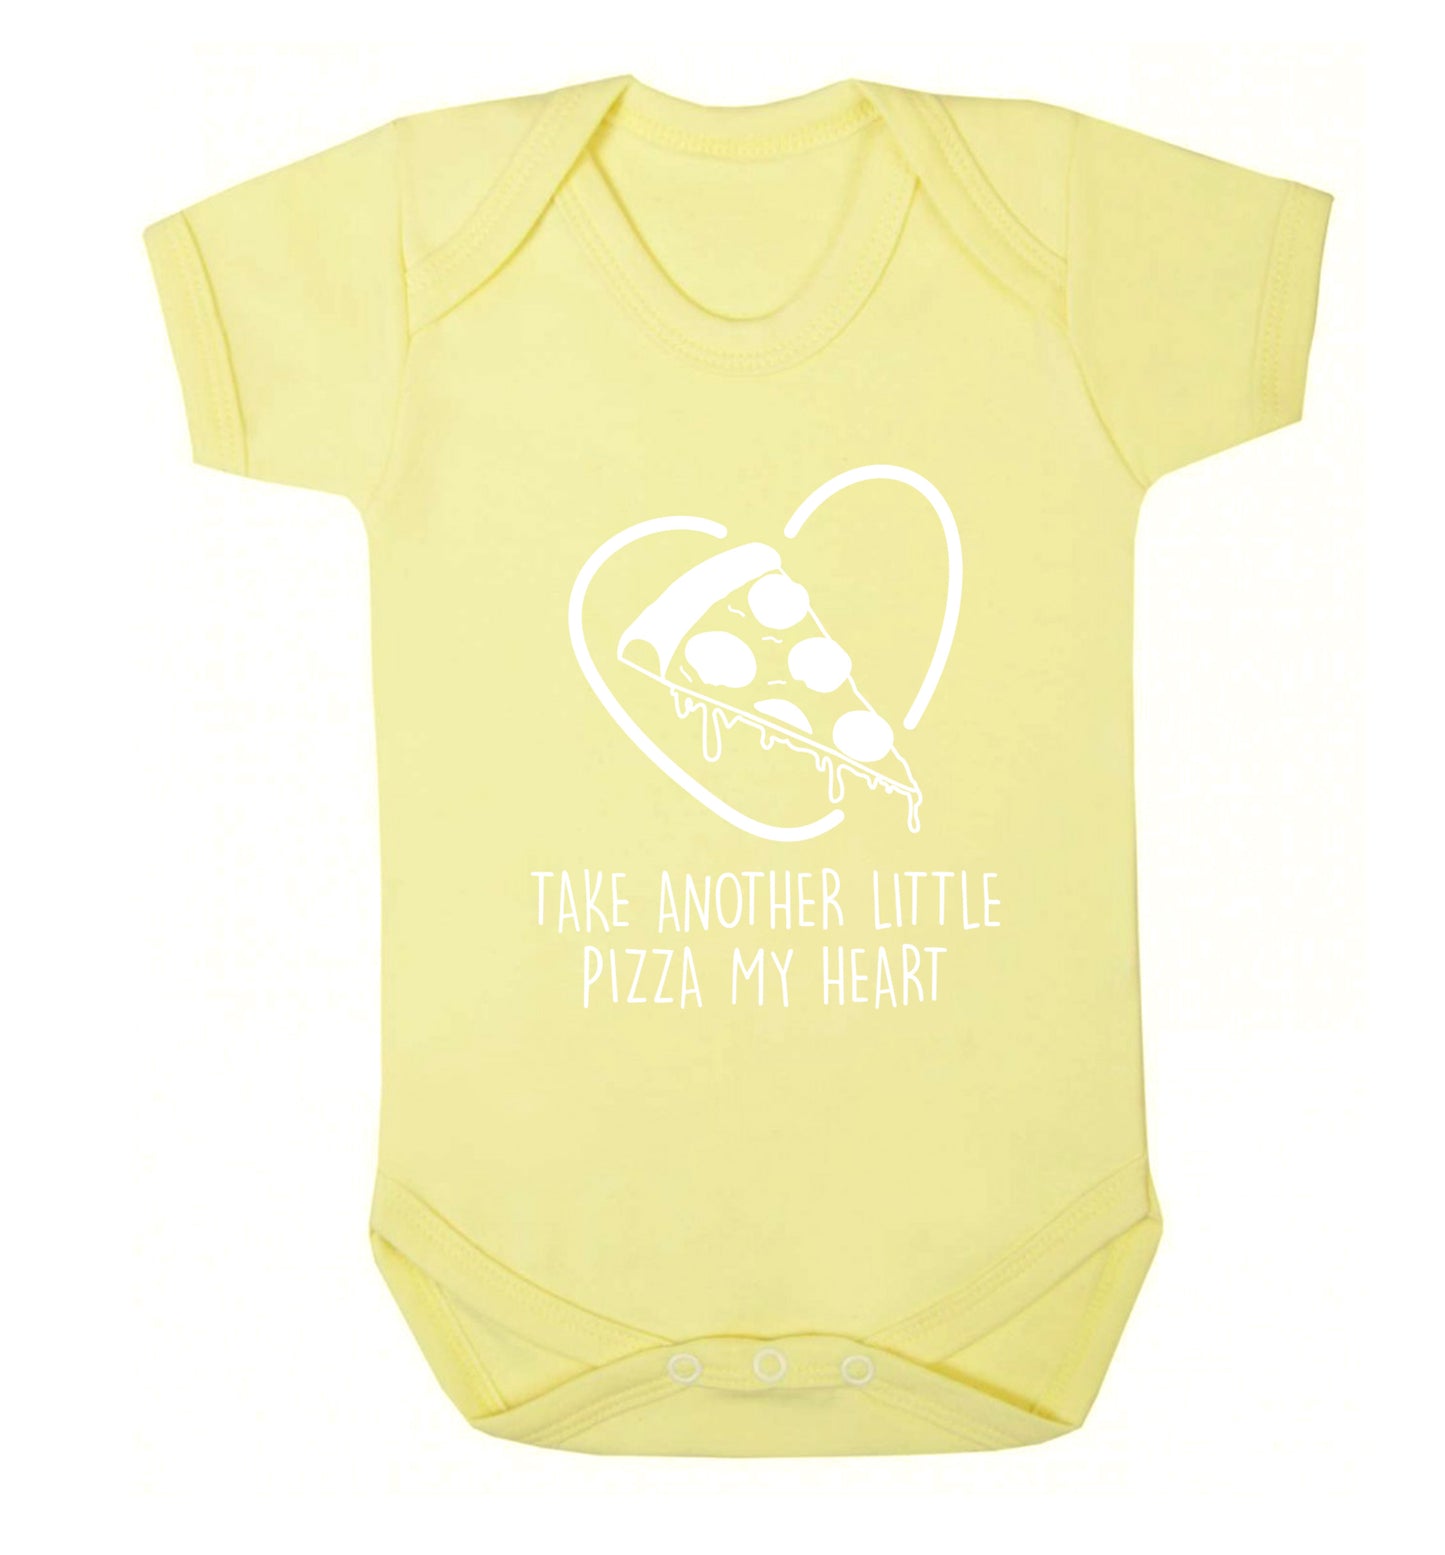 Take another little pizza my heart Baby Vest pale yellow 18-24 months